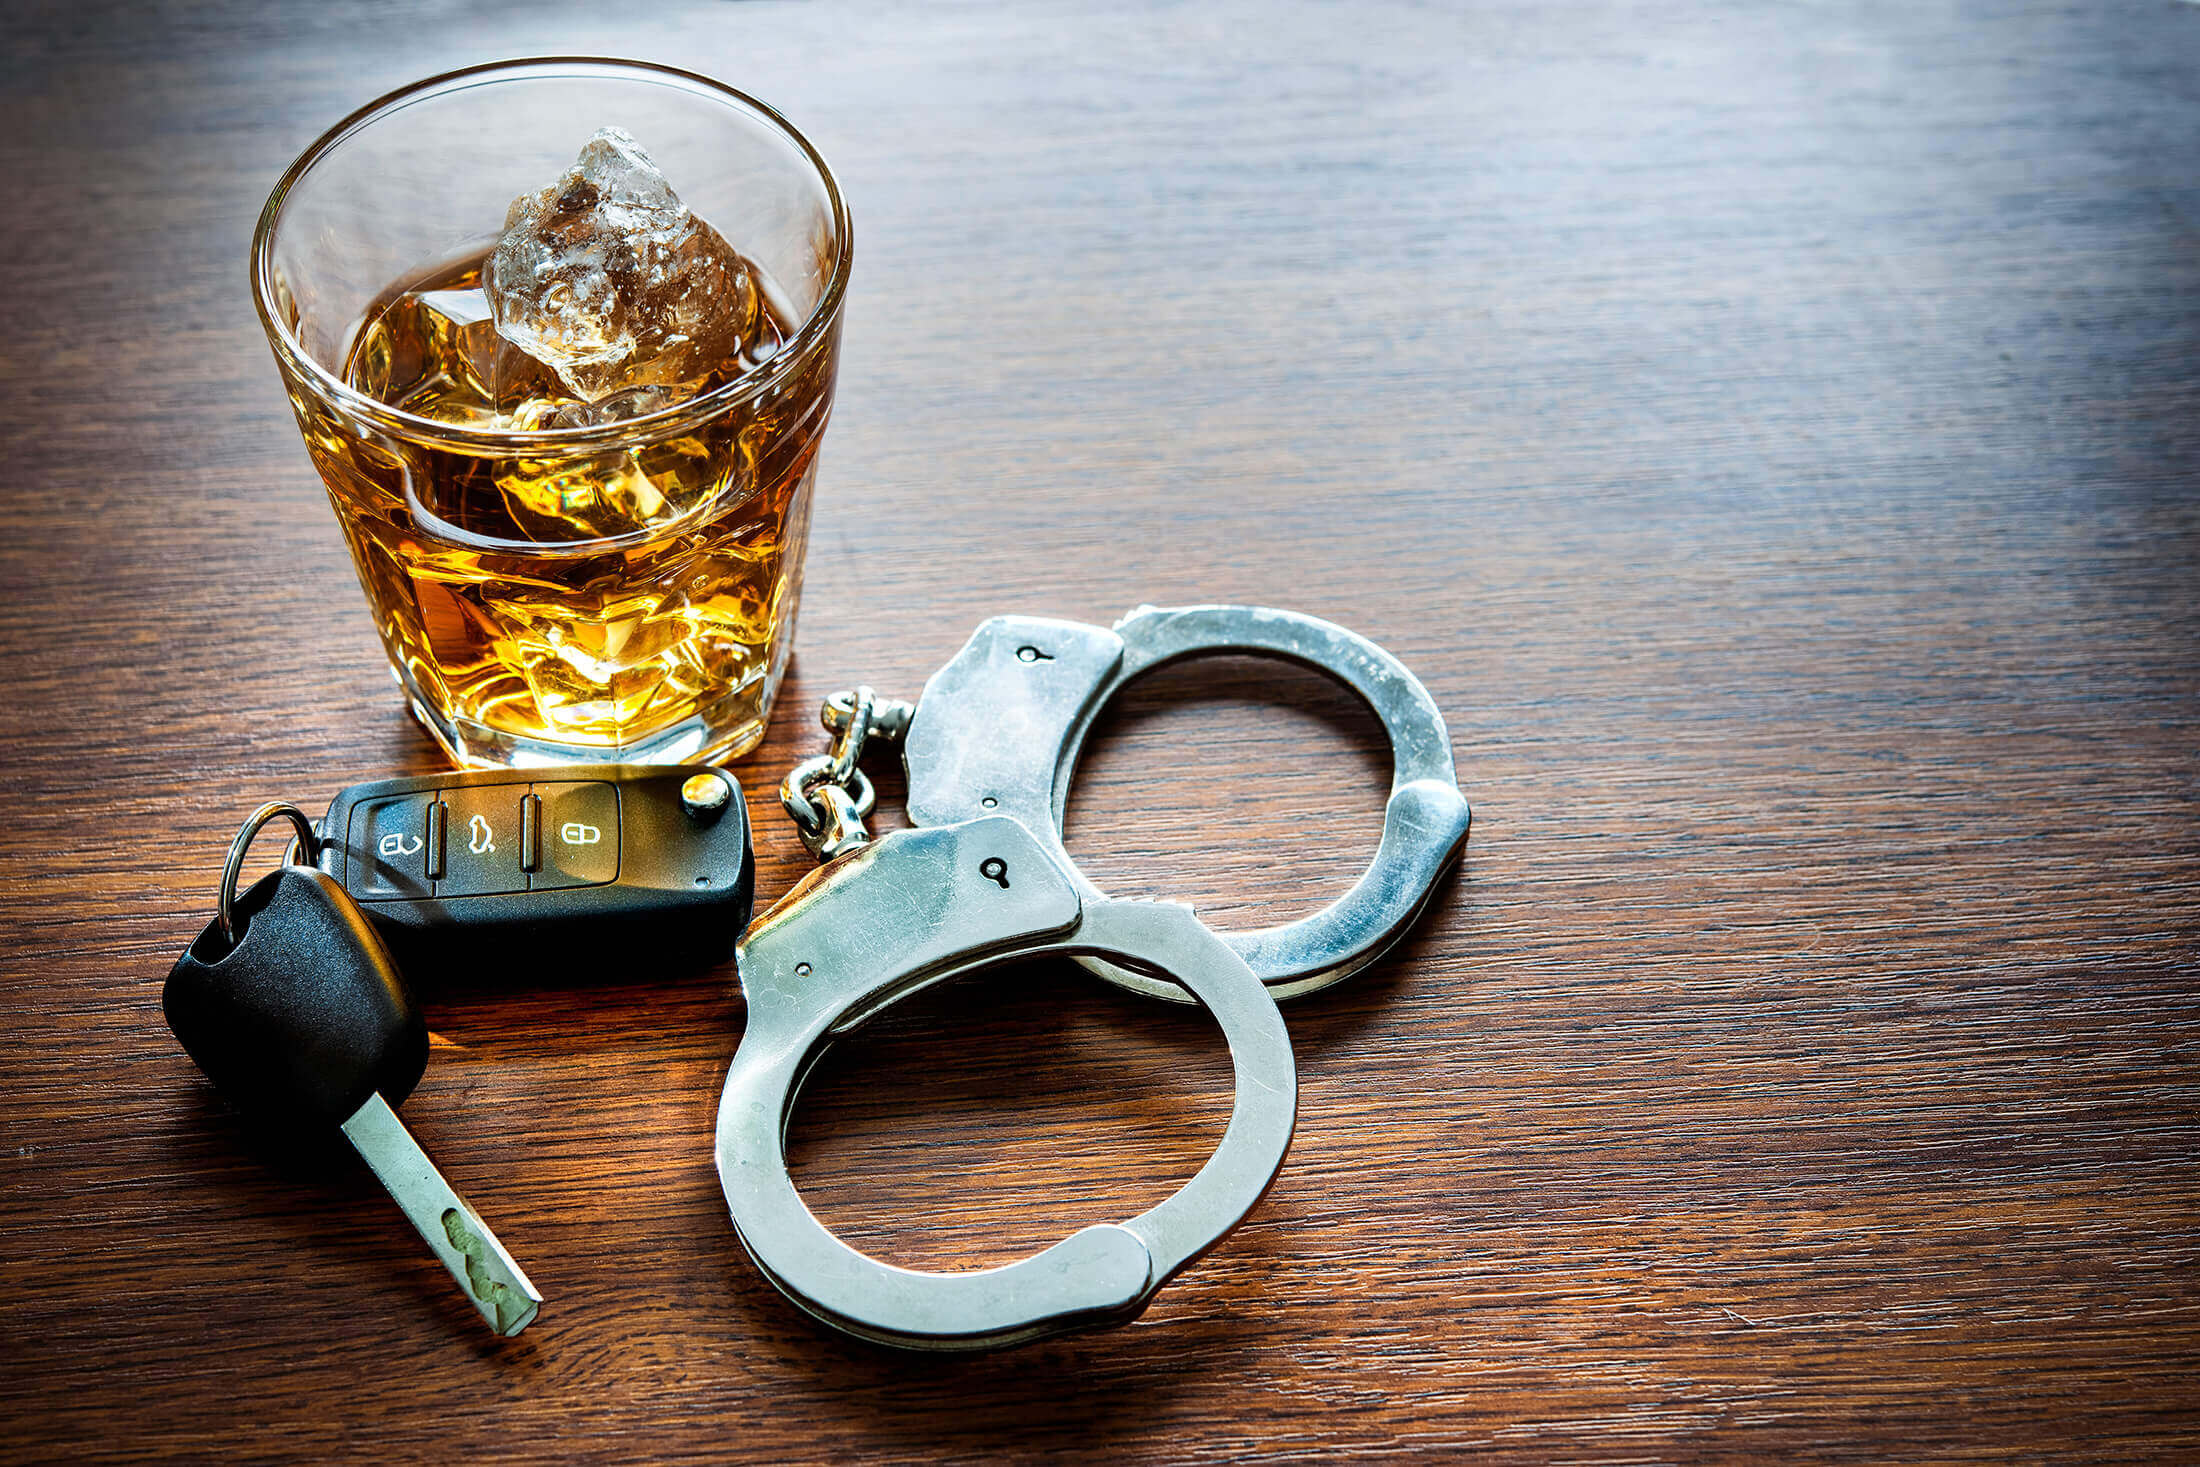 Blood or Breath Alcohol DUI Tests | Cook County DUI Lawyer